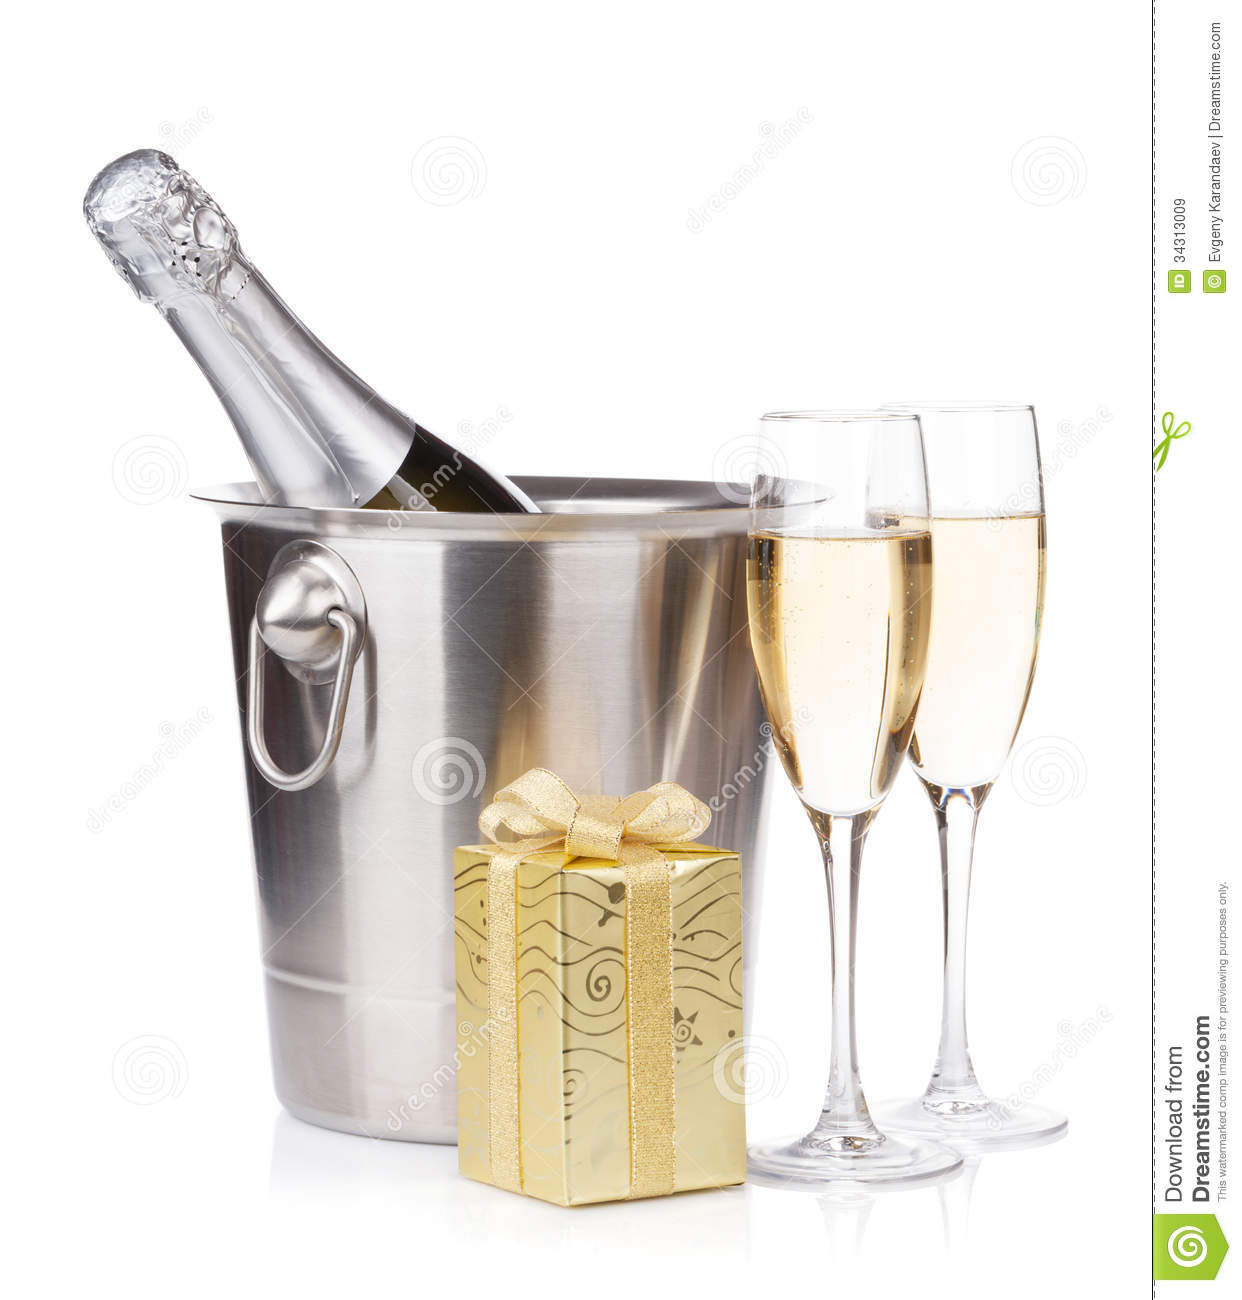 Champagne Bottle In Bucket Glasses And Gift Box Royalty Free Stock